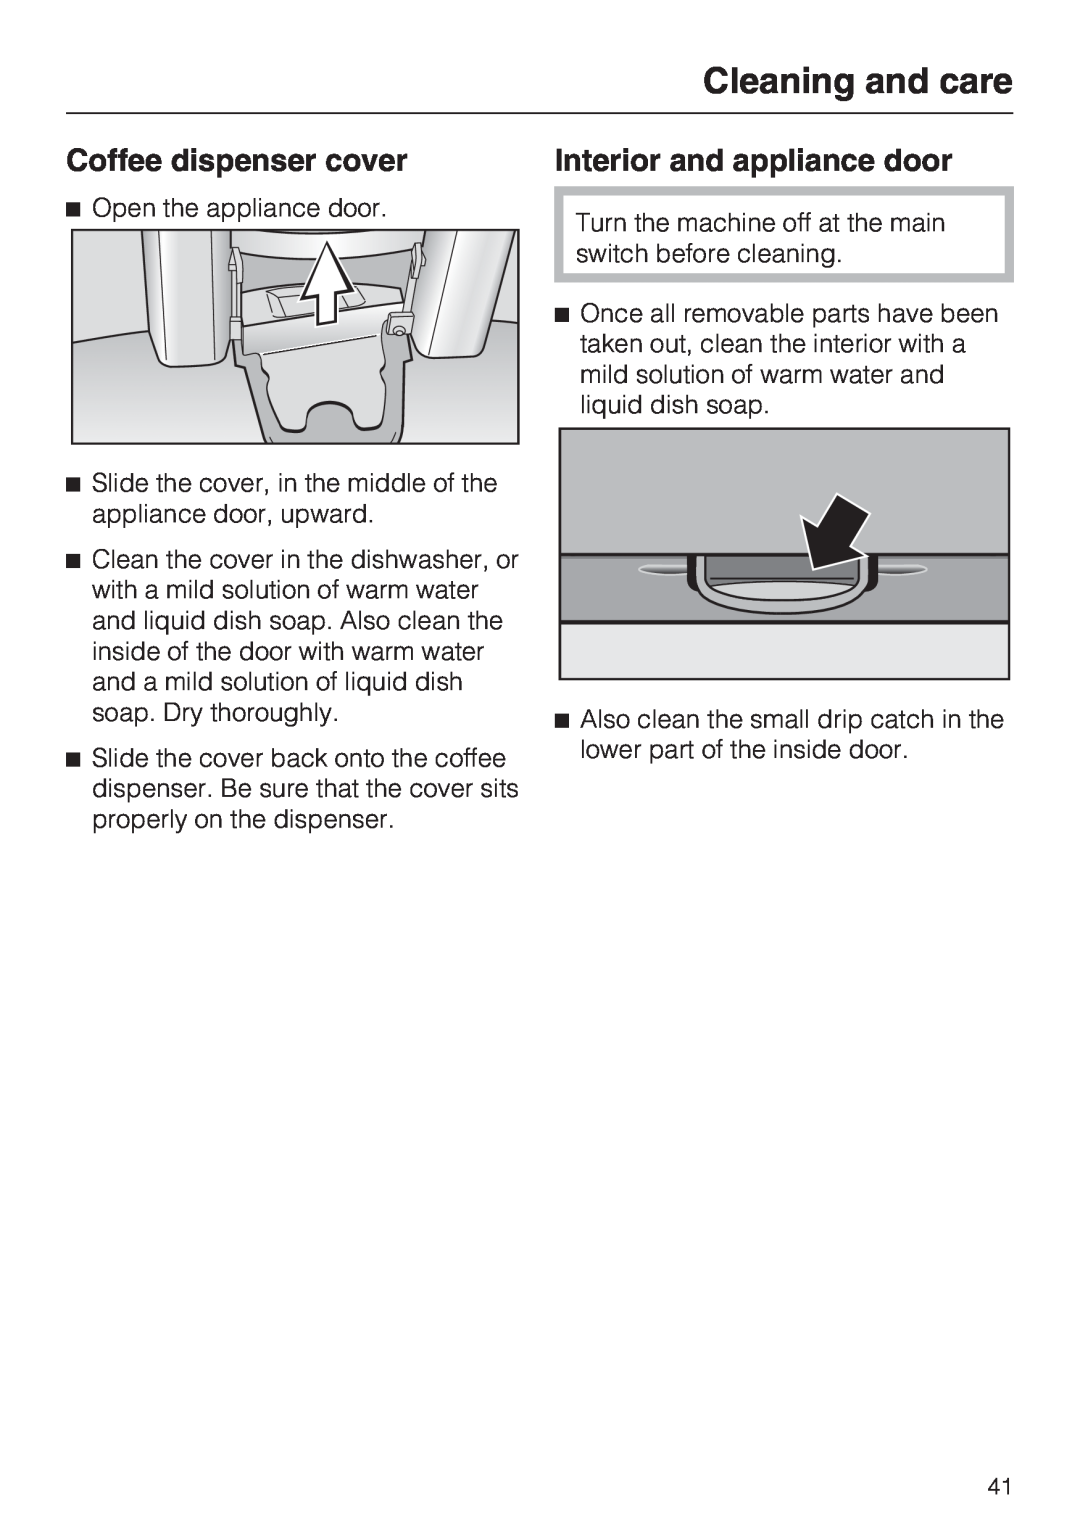 Miele CVA 2652 installation instructions Coffee dispenser cover, Interior and appliance door, Cleaning and care 